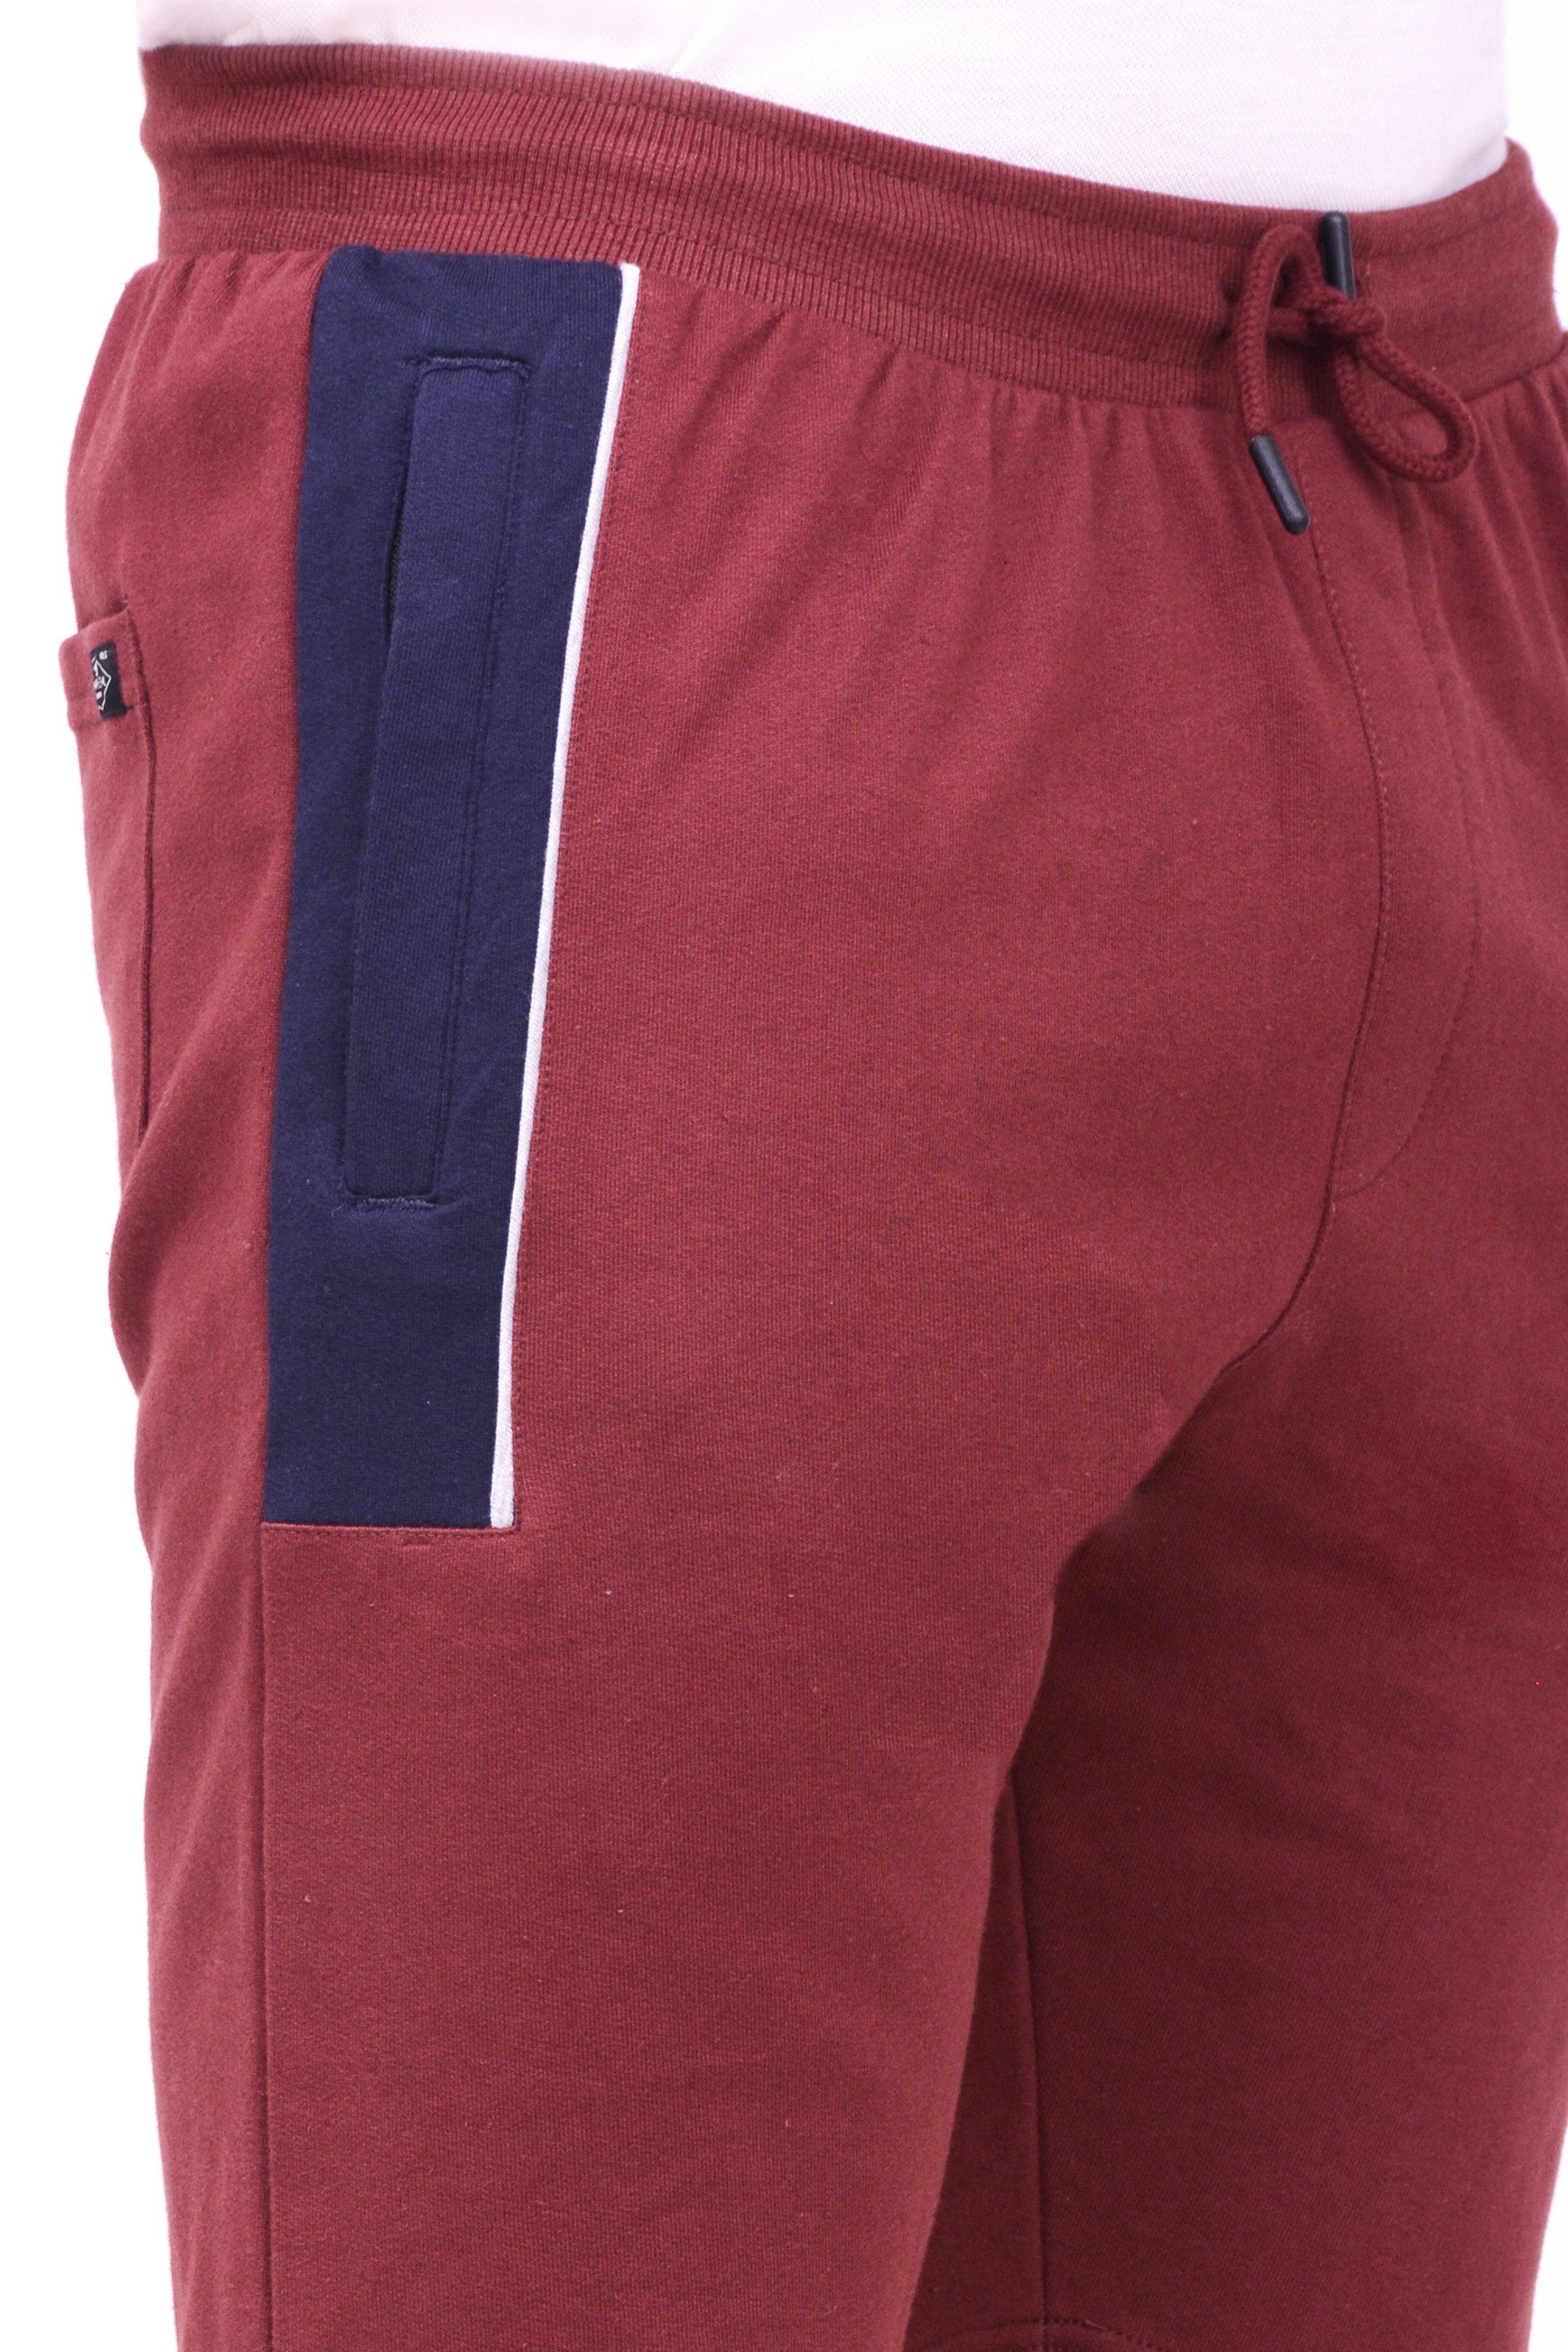 FRENCH TERRY SHORTS RUST at Charcoal Clothing